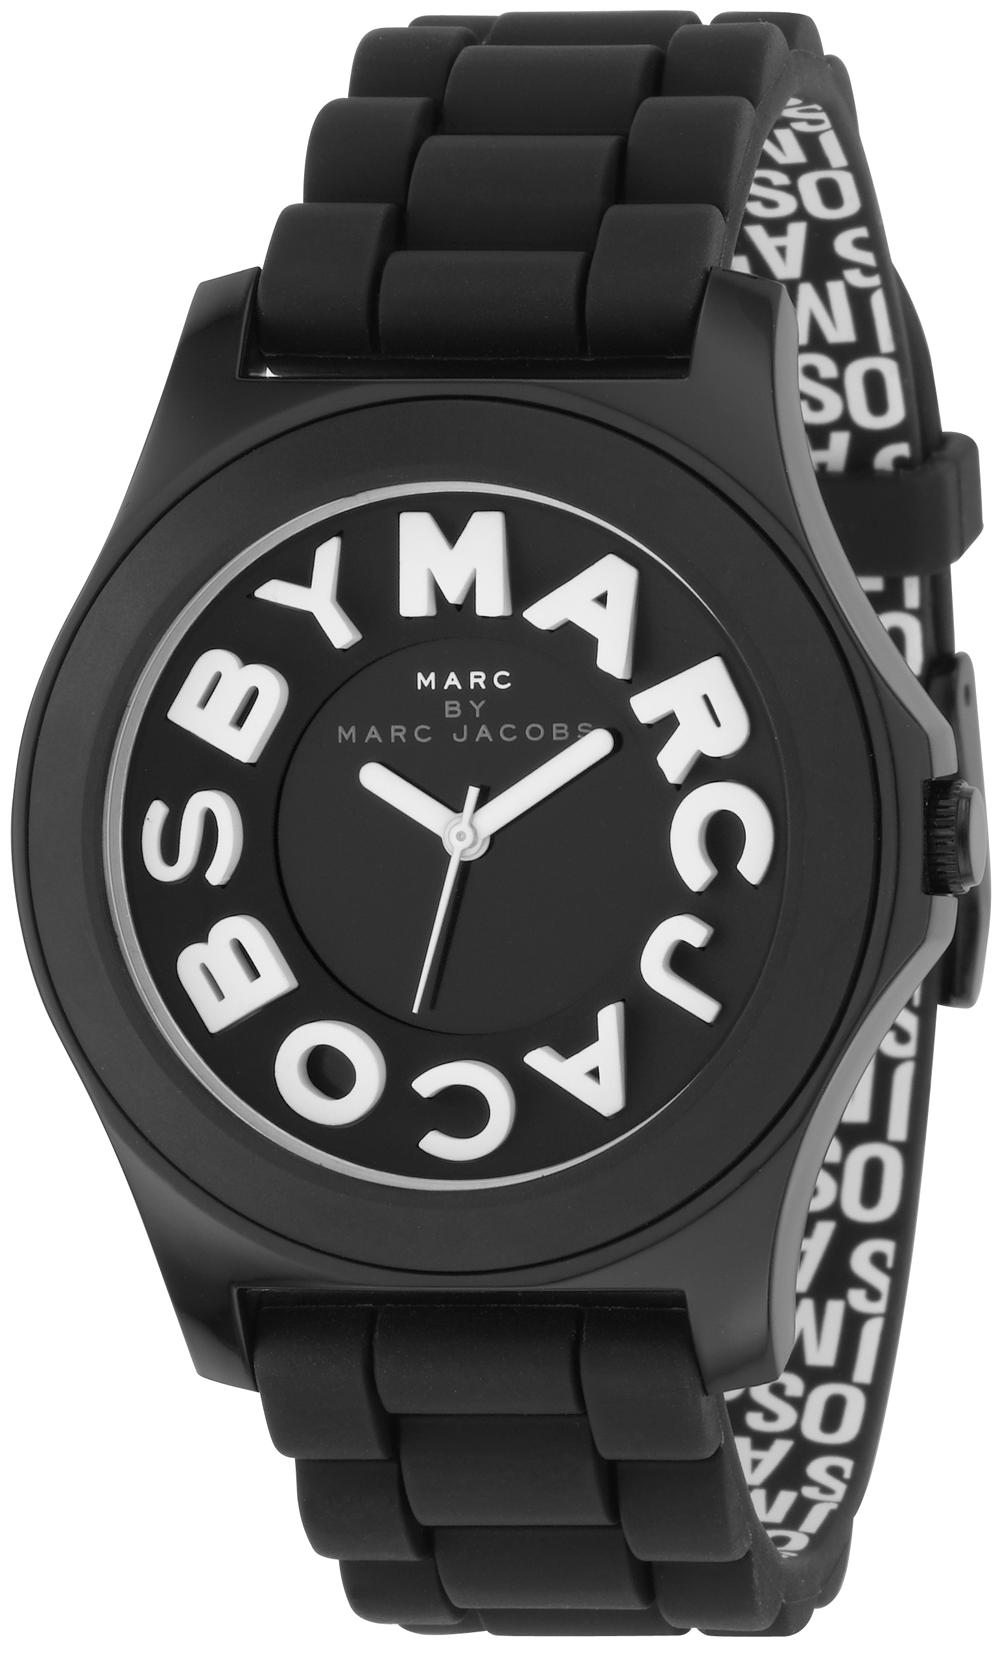 Marc Jacobs #designer #watch #accessory #style | Marc jacobs, Marc ...